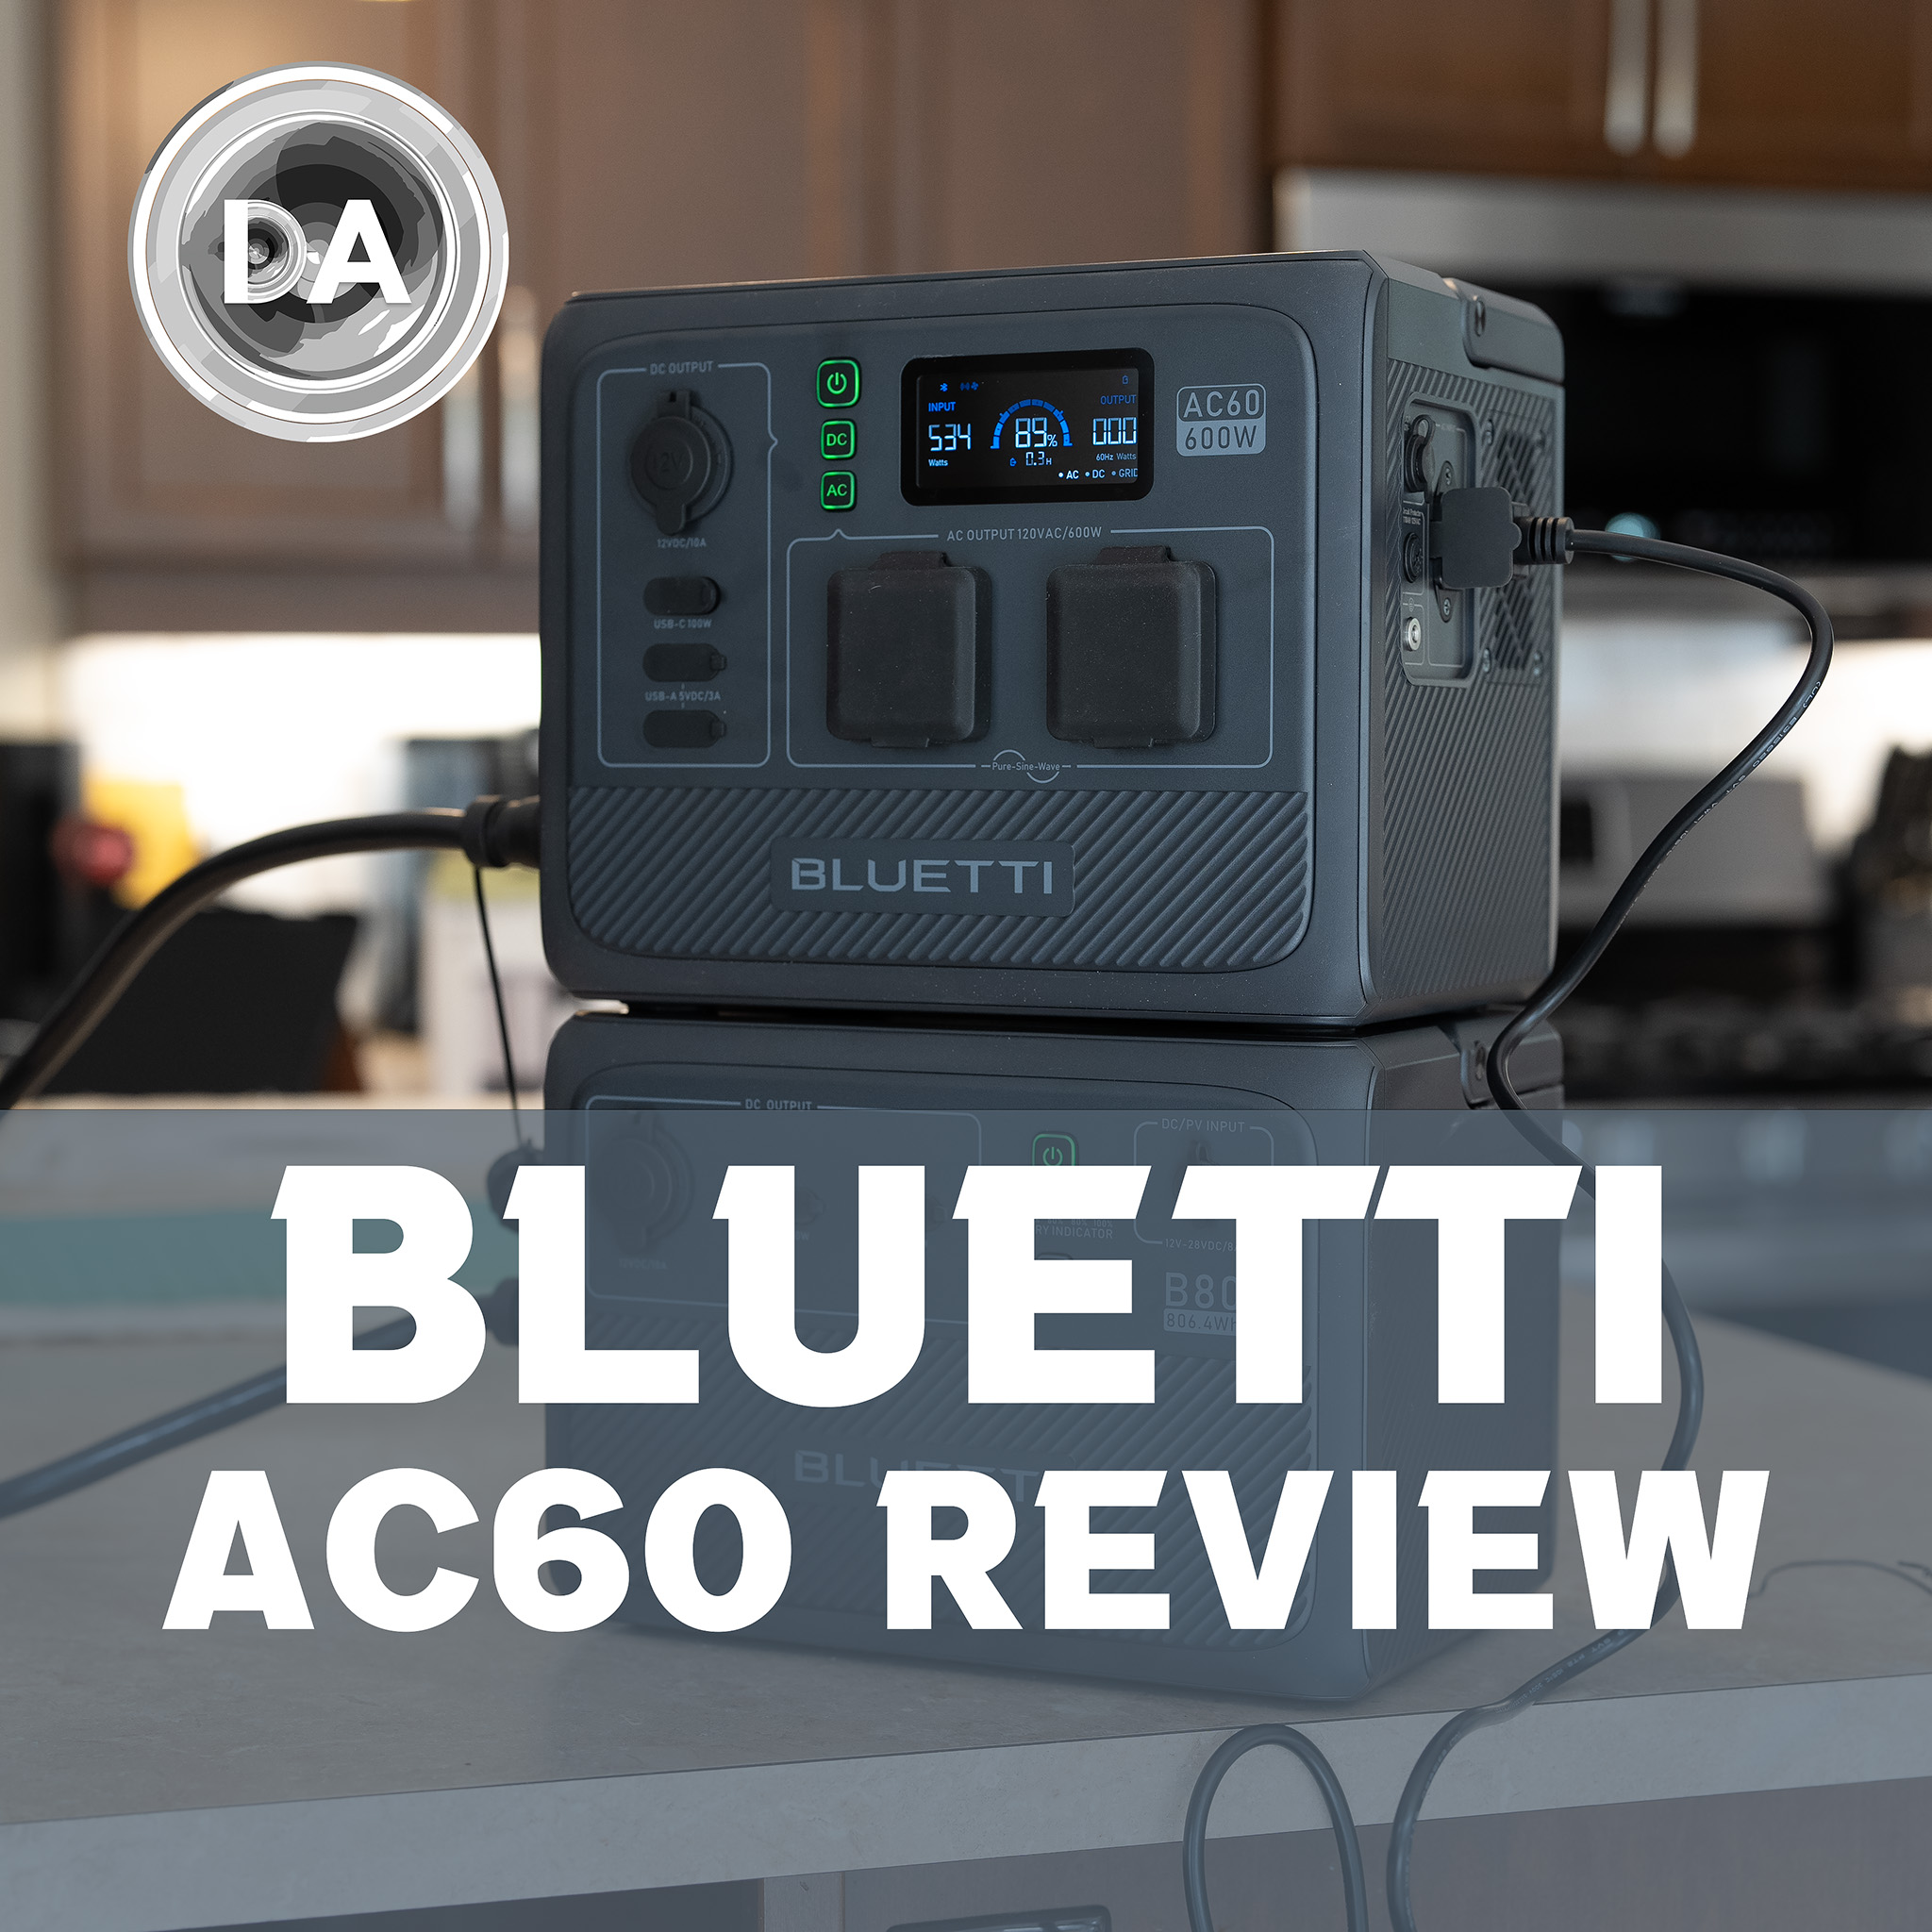 BLUETTI Portable Power Station AC60, 403Wh LiFePO4 Battery Backup w/ 2 600W  (1200W Surge) AC Outlets, 1 Hour Fast Charge, Dustproof and Water